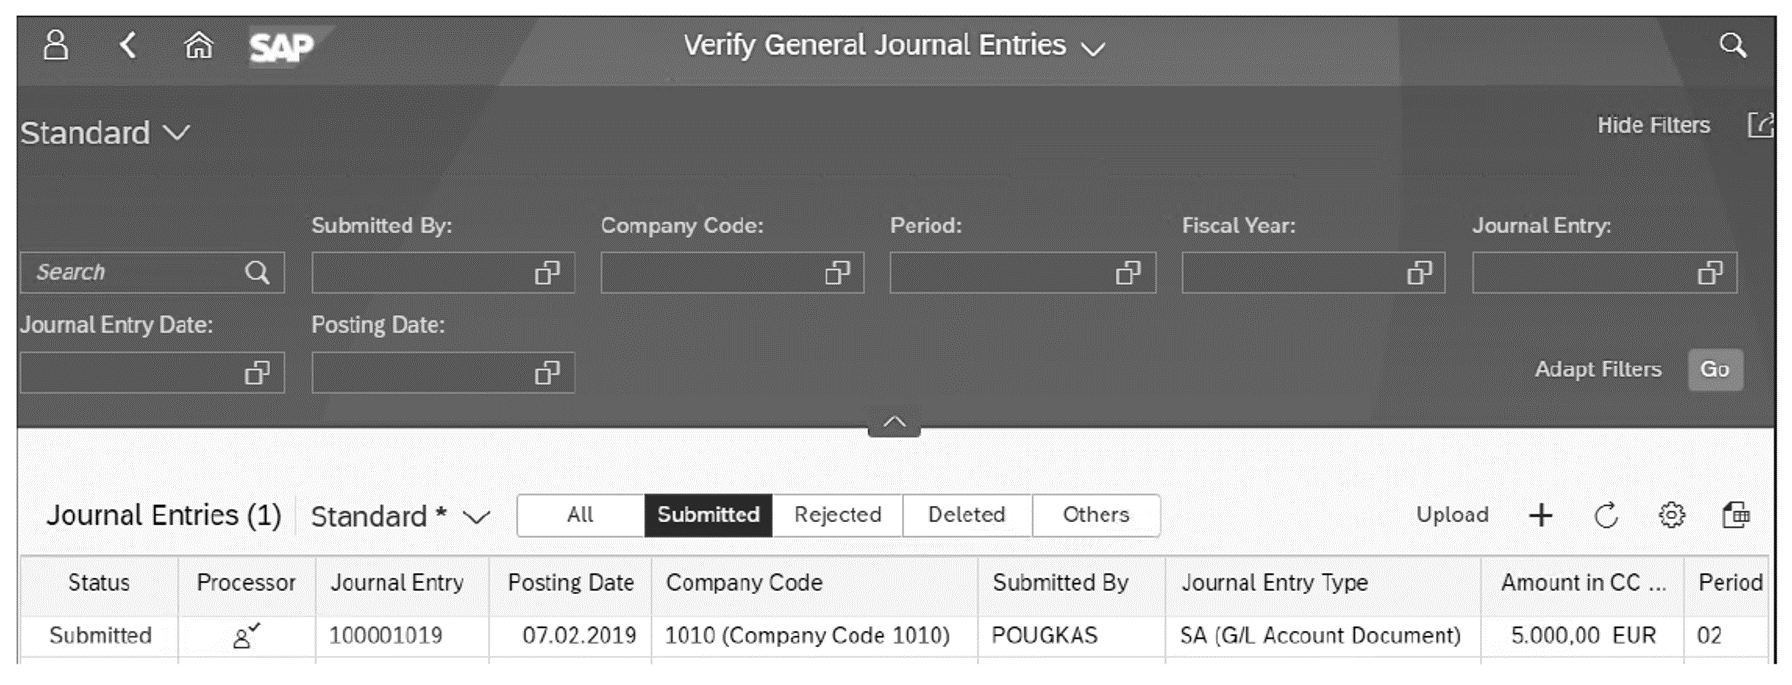 Verify General Journal Entries for Requester App